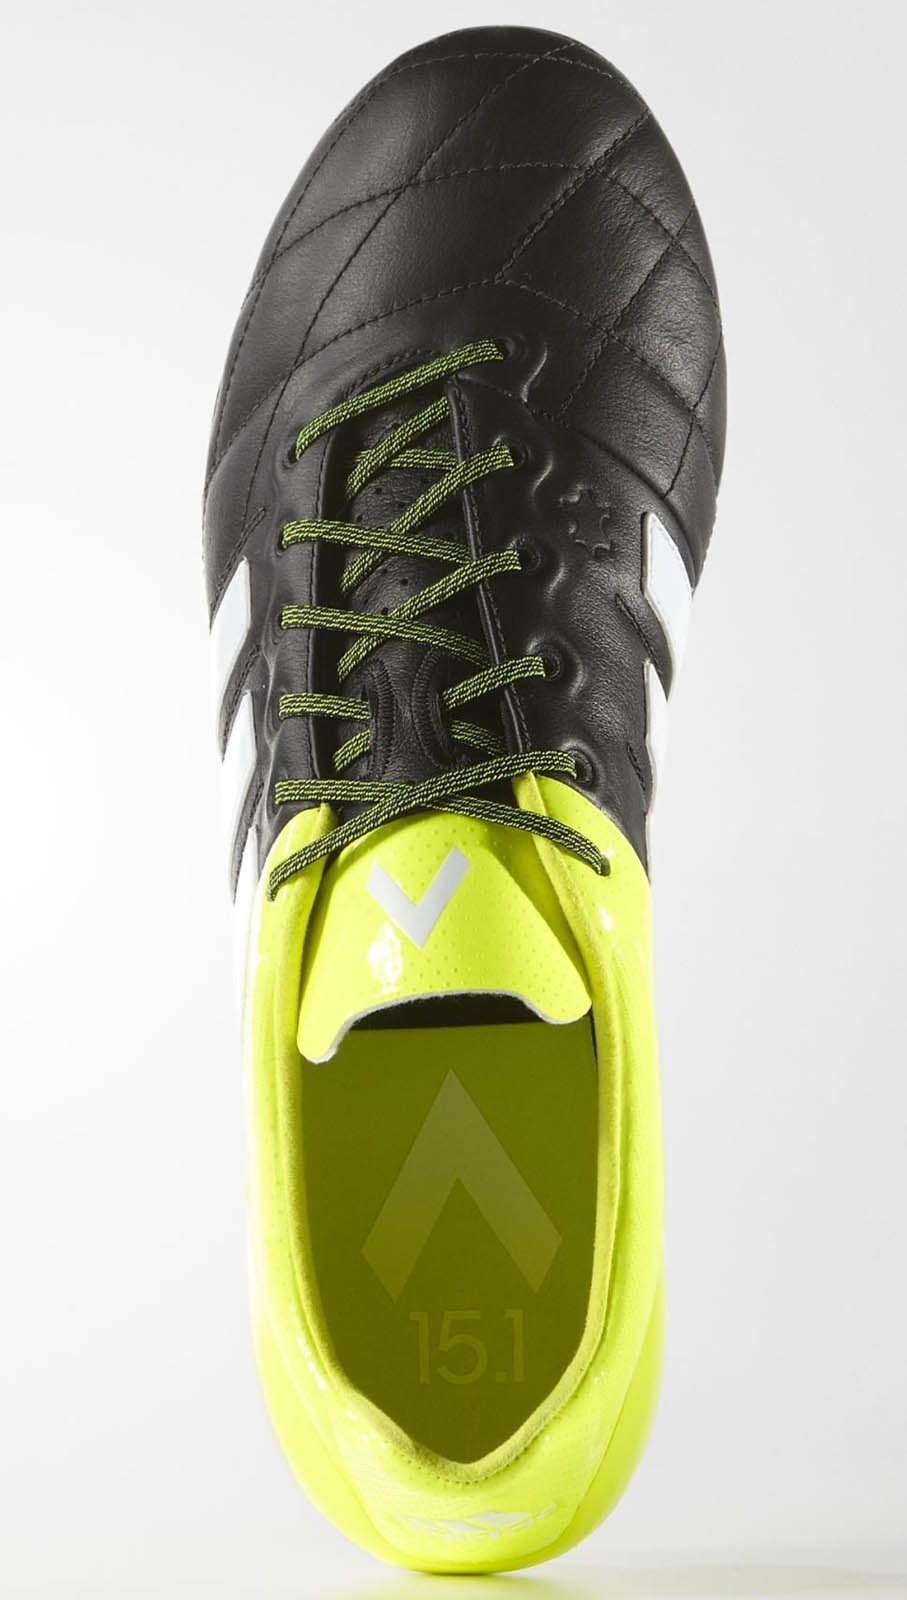 Ace 2015 Leather Boots Released - Footy Headlines